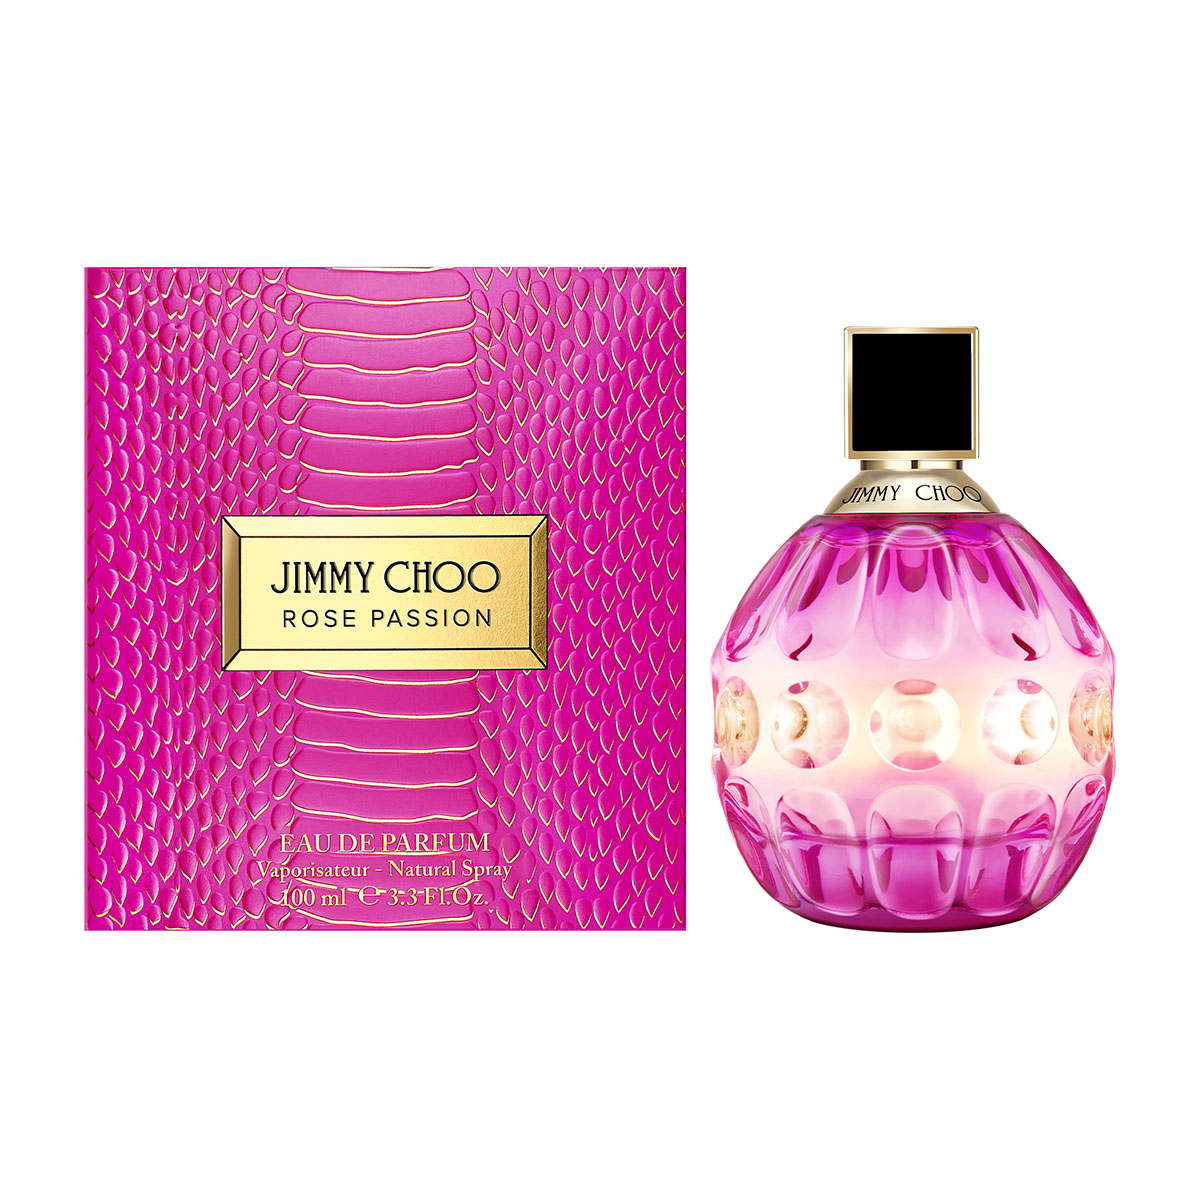 JIMMY CHOO_ROSE_PASSION_100ML_PACK + BOTTLE_FRONT VIEW_master